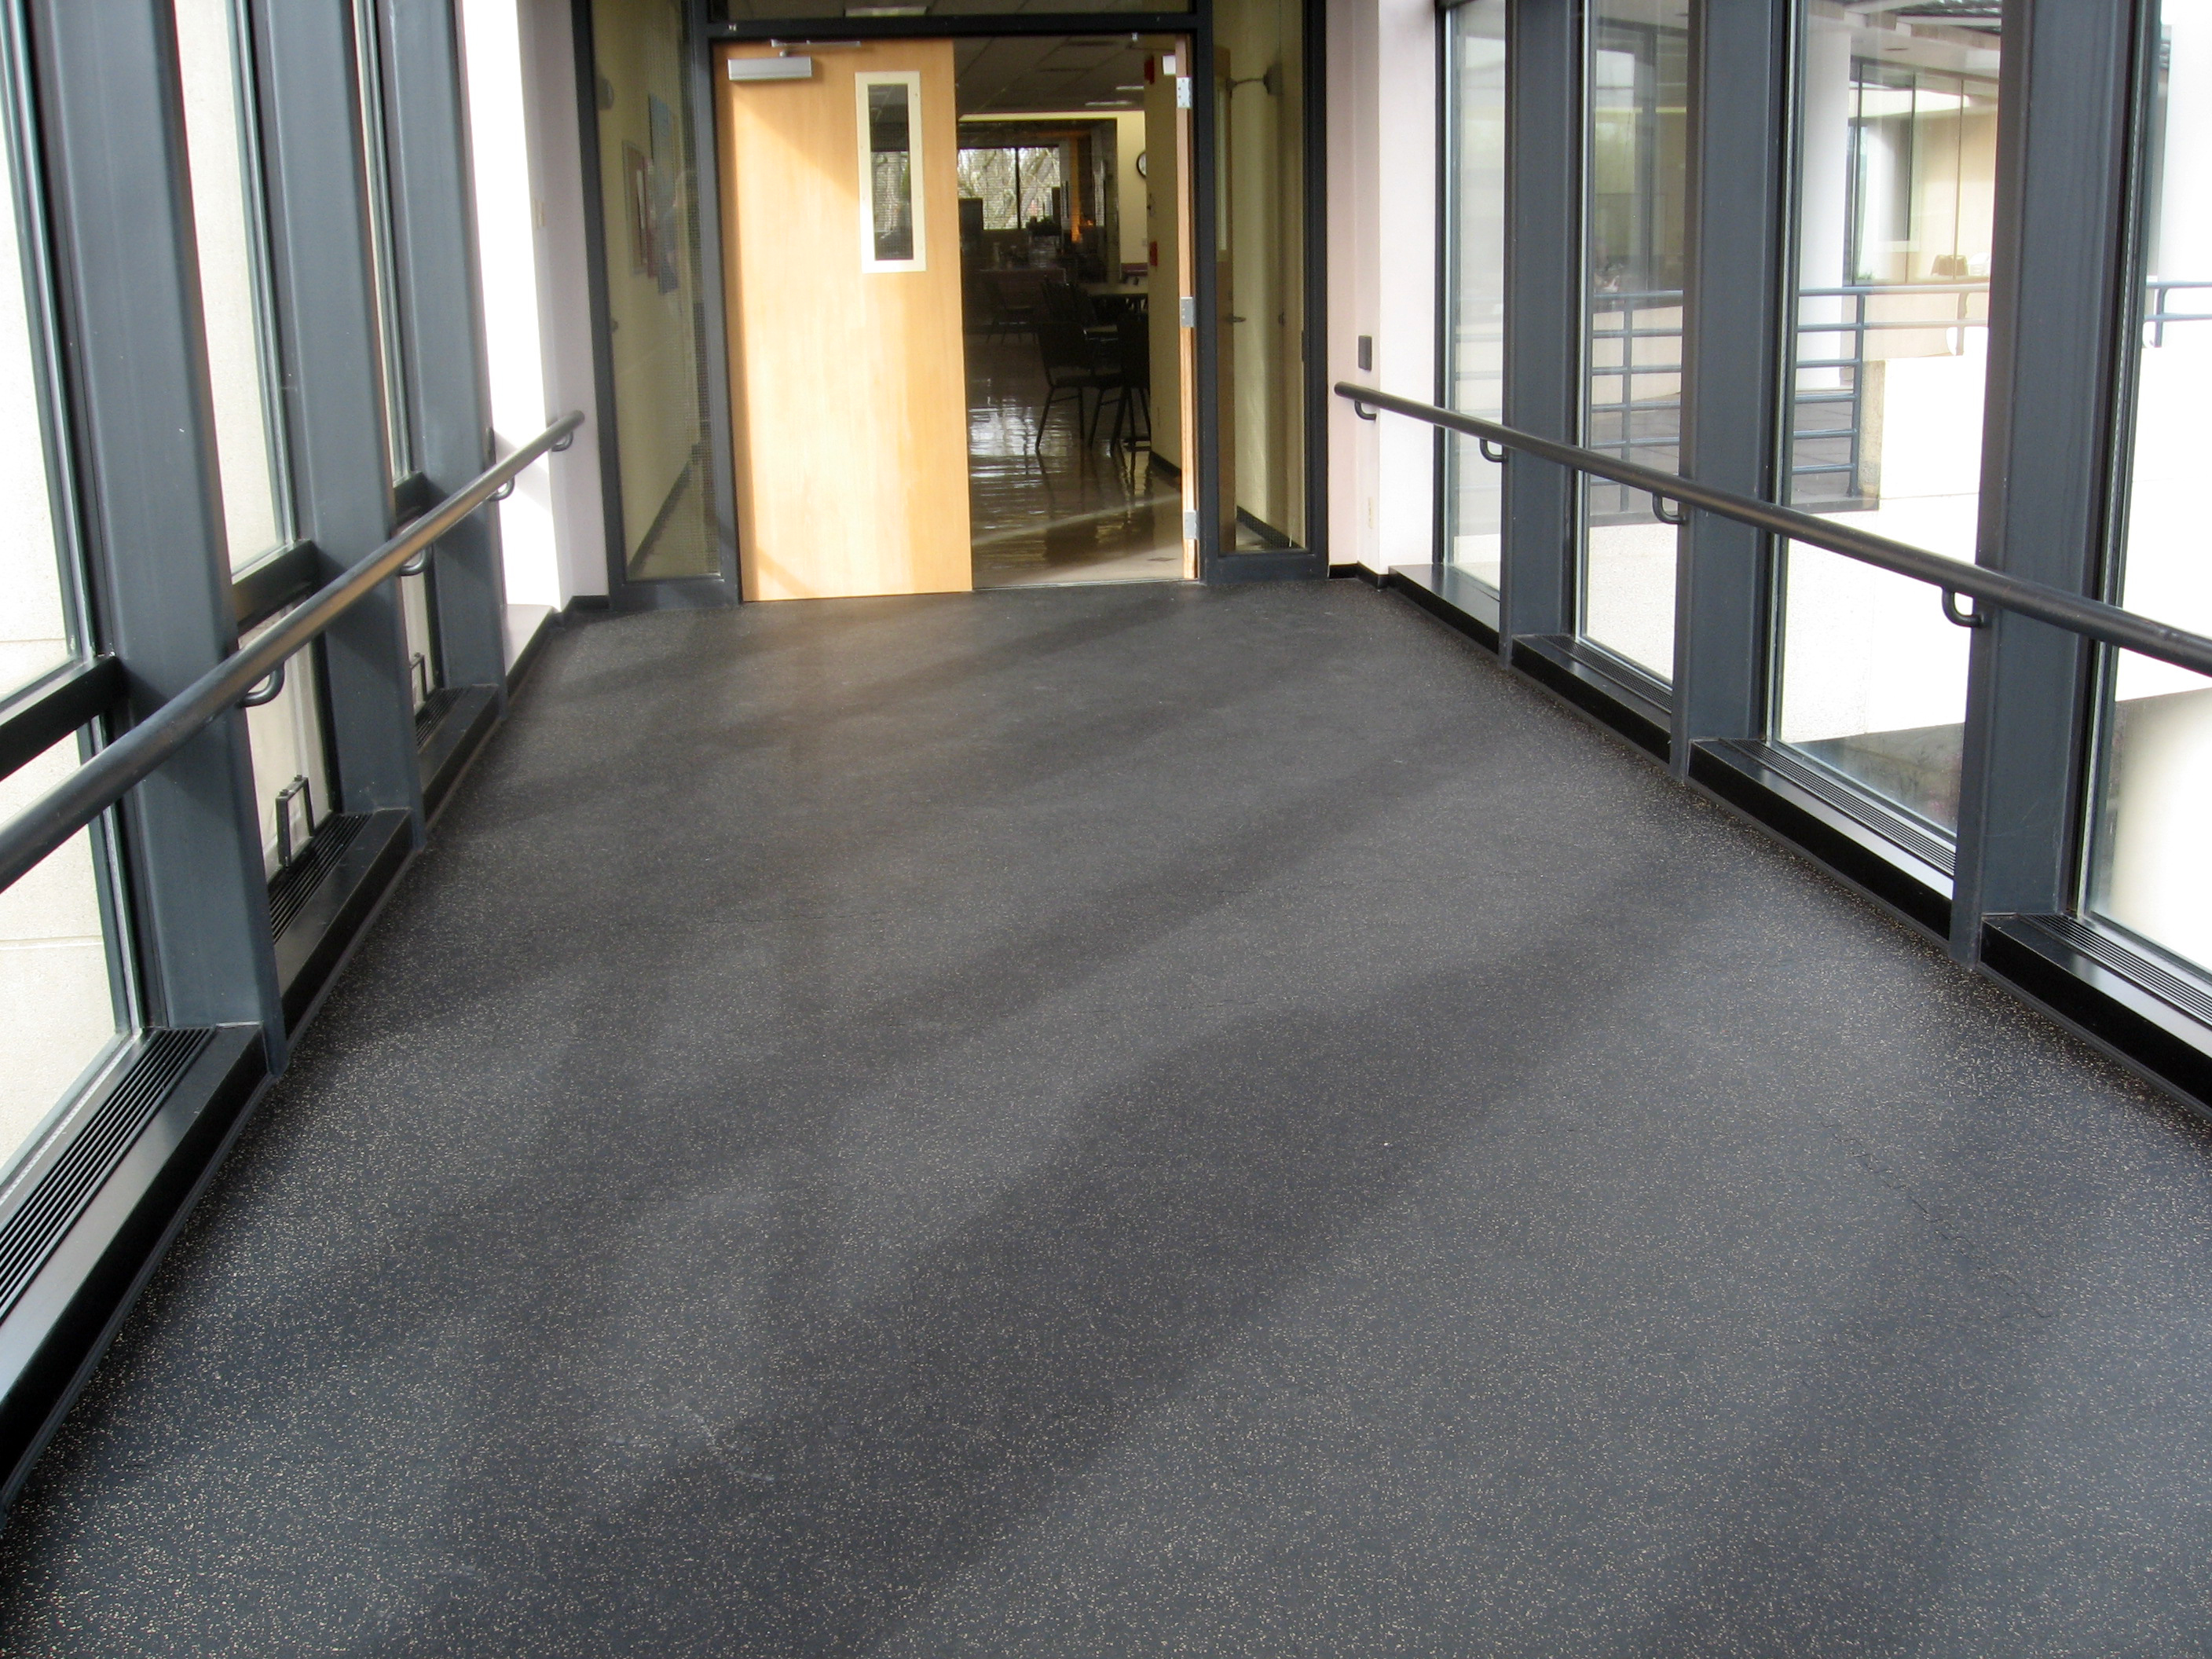 Rubber Interlocking Floor Tiles For Pro Or Home Gyms Easy To Install